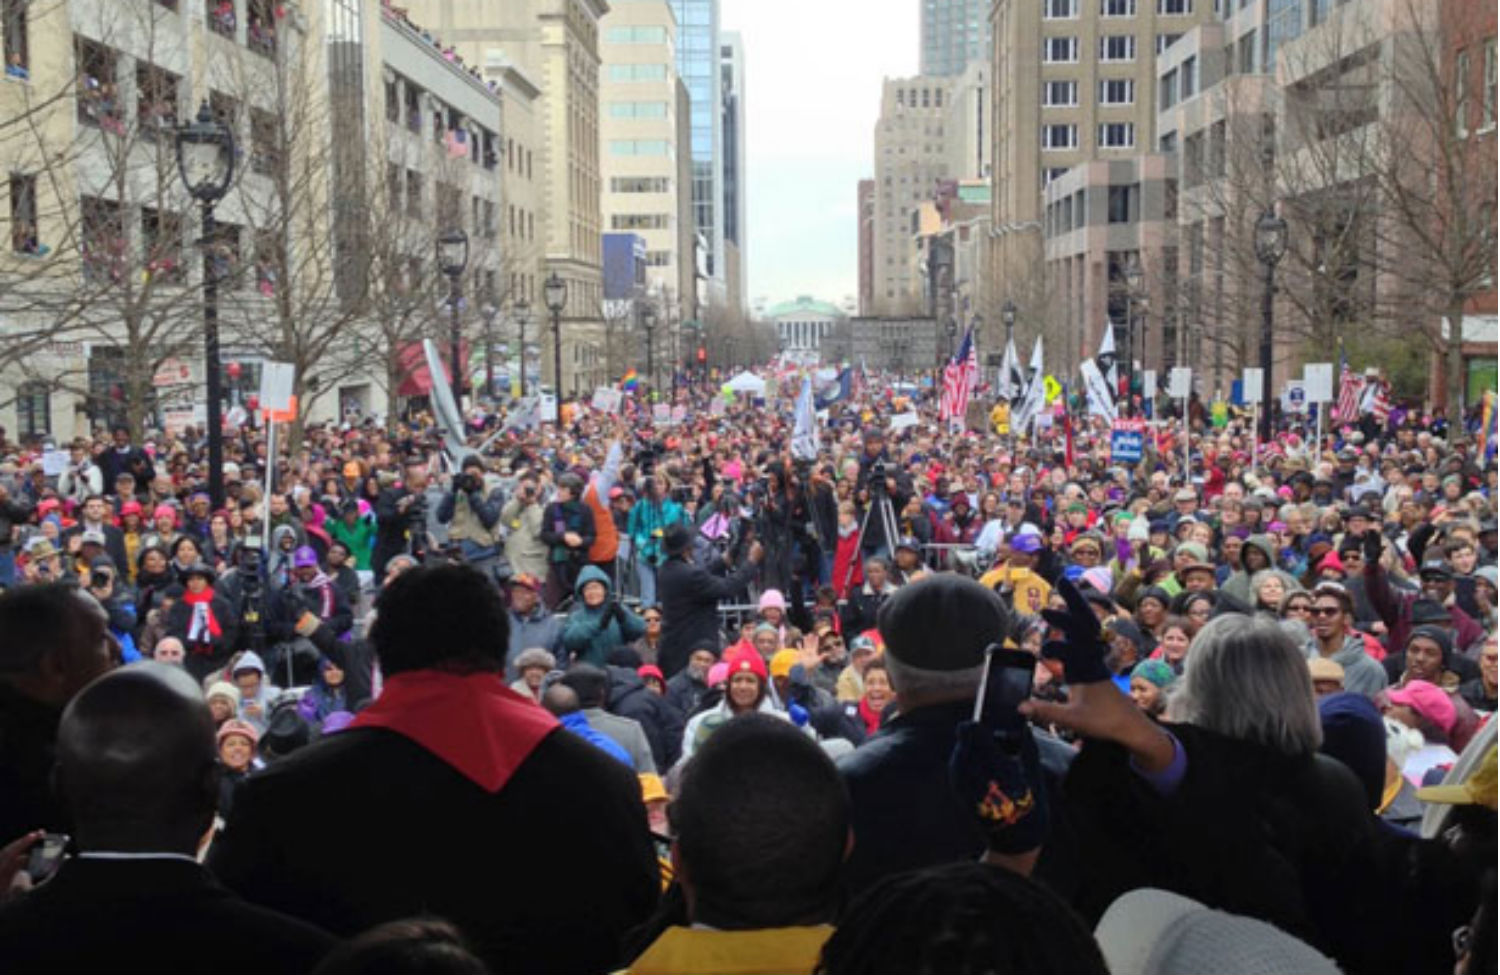 North Carolina’s Moral Monday Movement Kicks Off 2014 With a Massive Rally in Raleigh